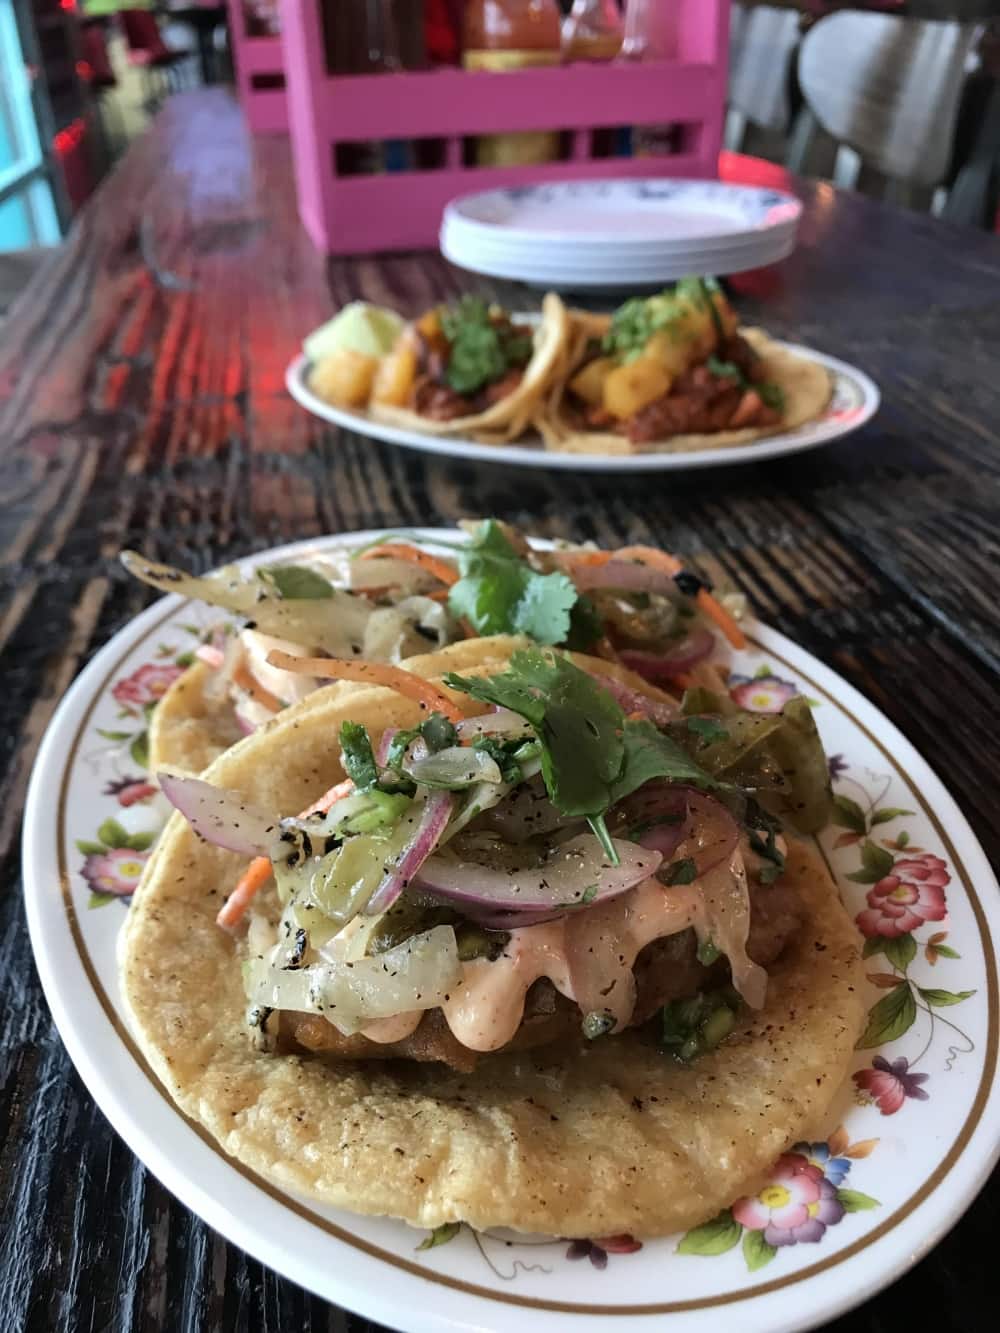 Fried Chicken Taco with Baja style beer battered chicken, smoked cabbage slaw, and ghost pepper mayo from Broken English Taco in Chicago, IL. 